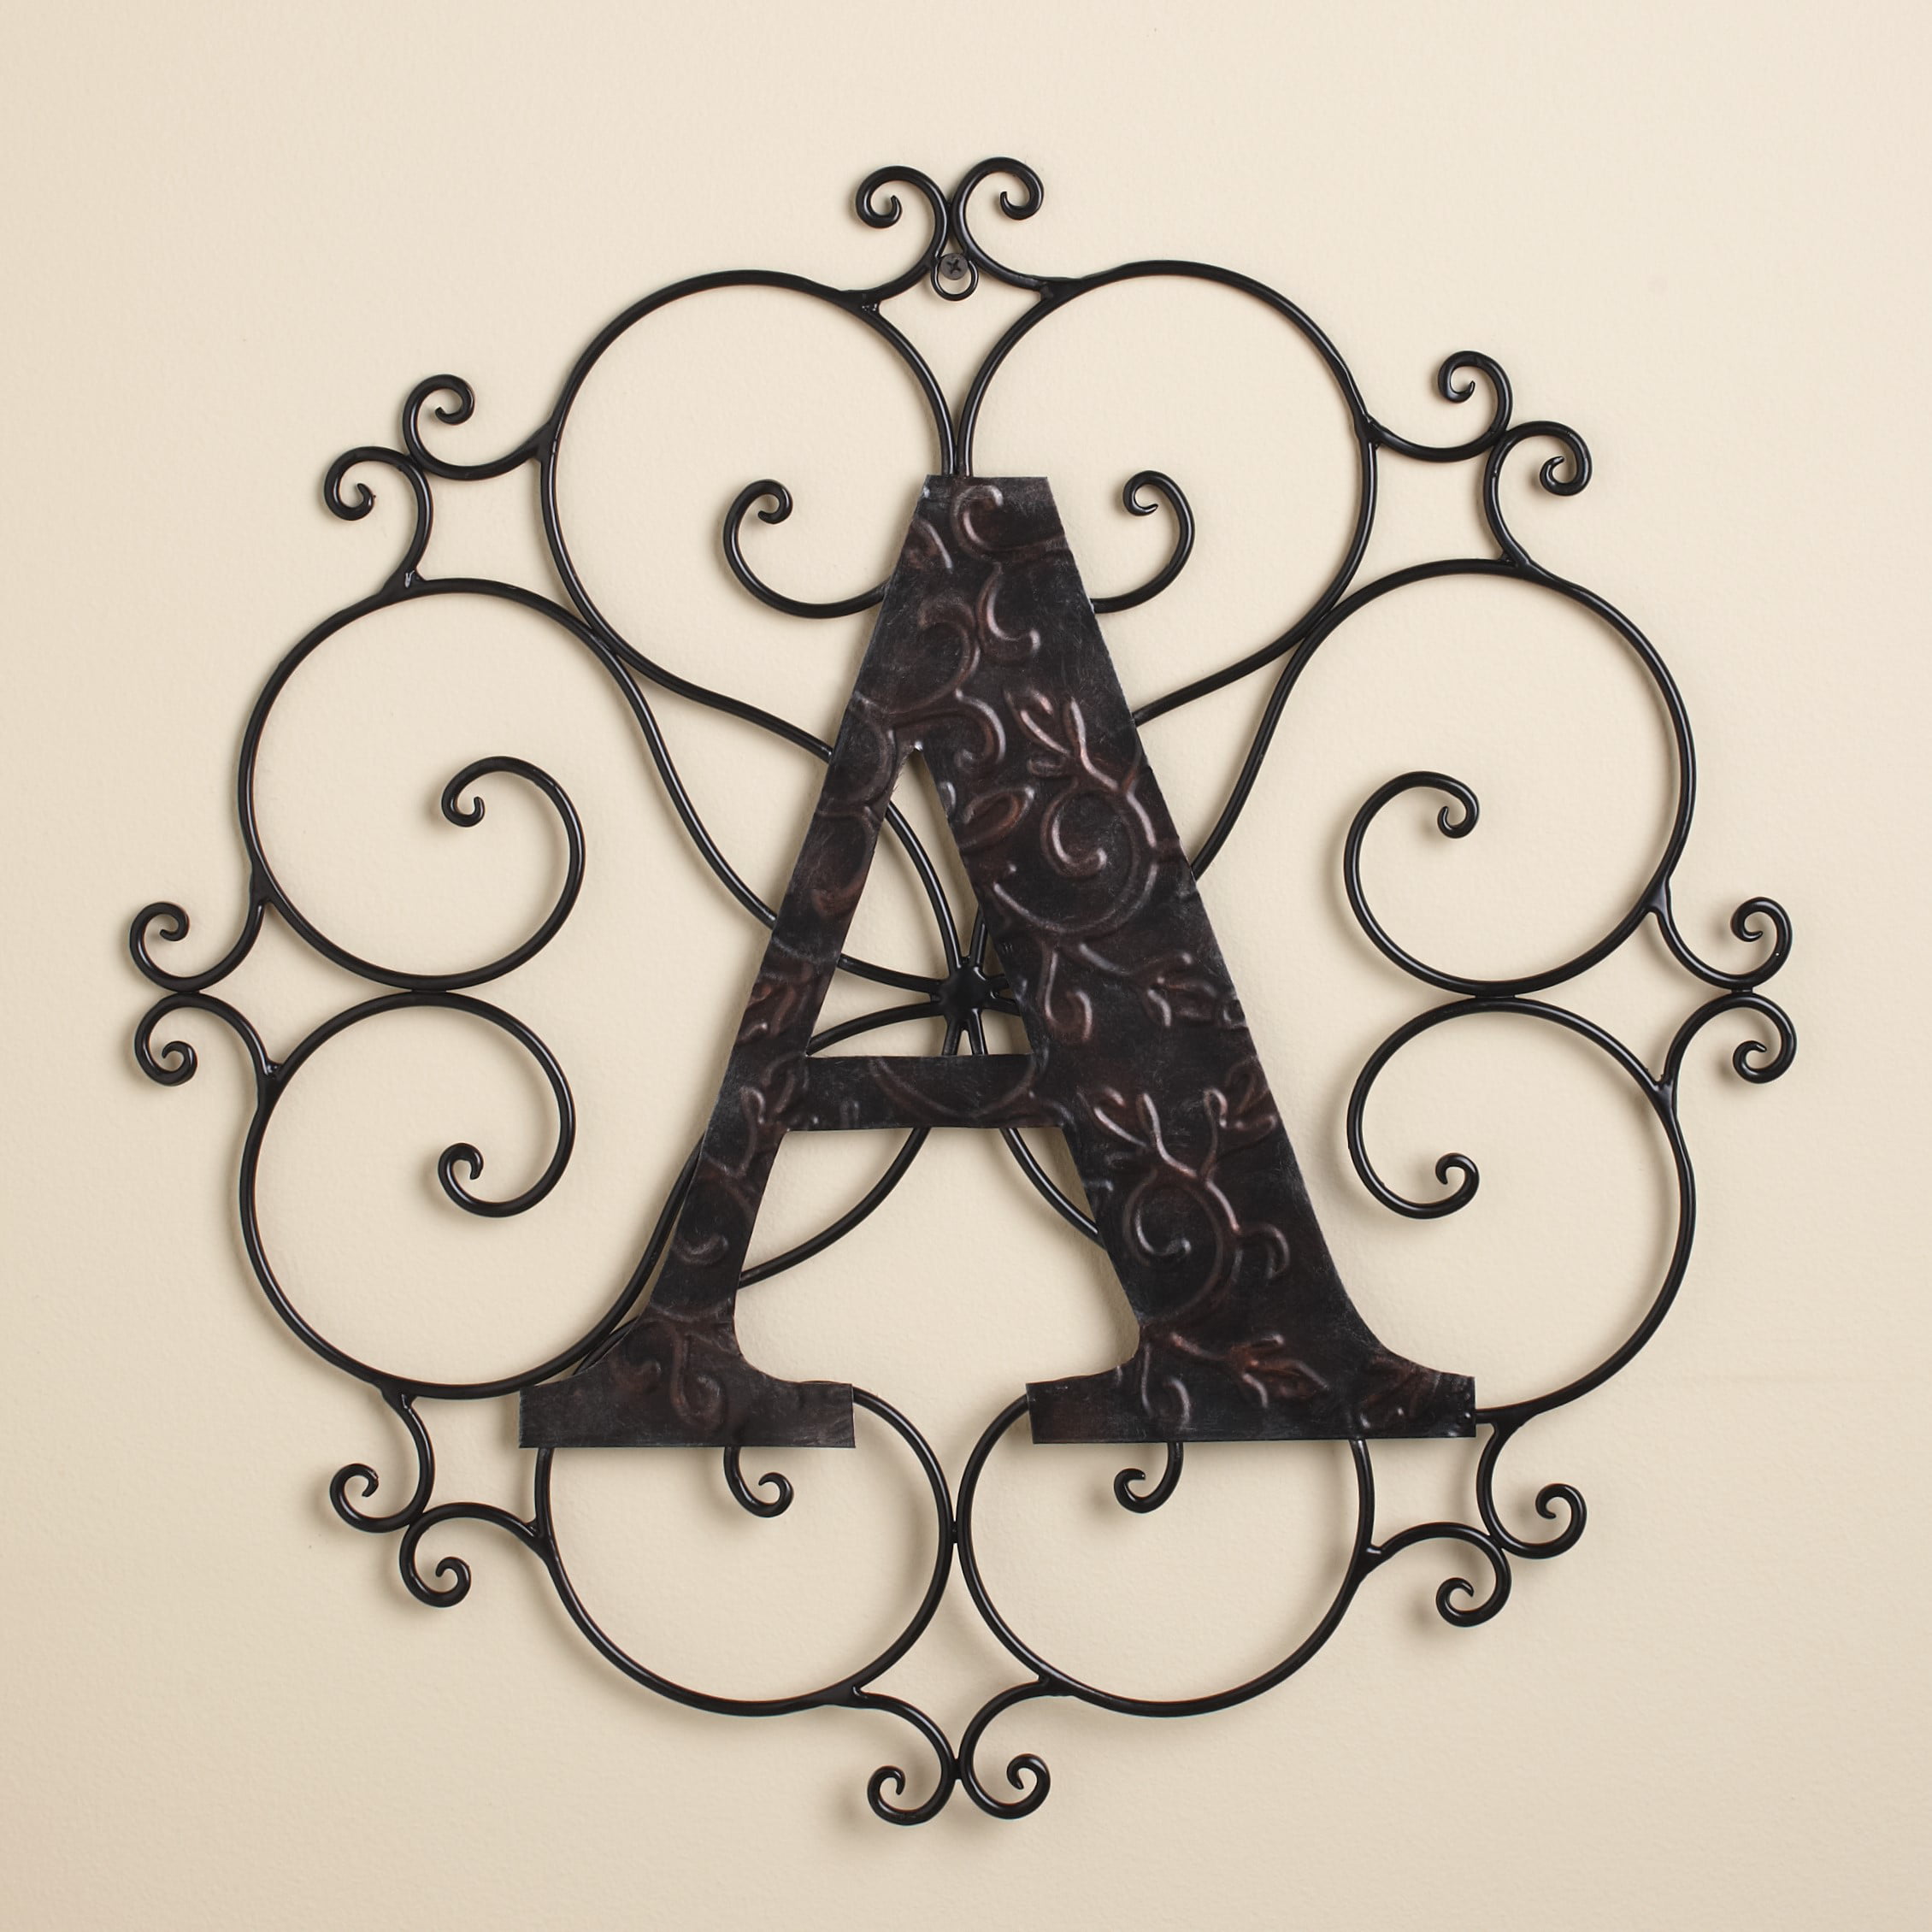 The Letter D Indoor Outdoor Wall Hanging Metal Rustic Initial Scrollwork Decor 